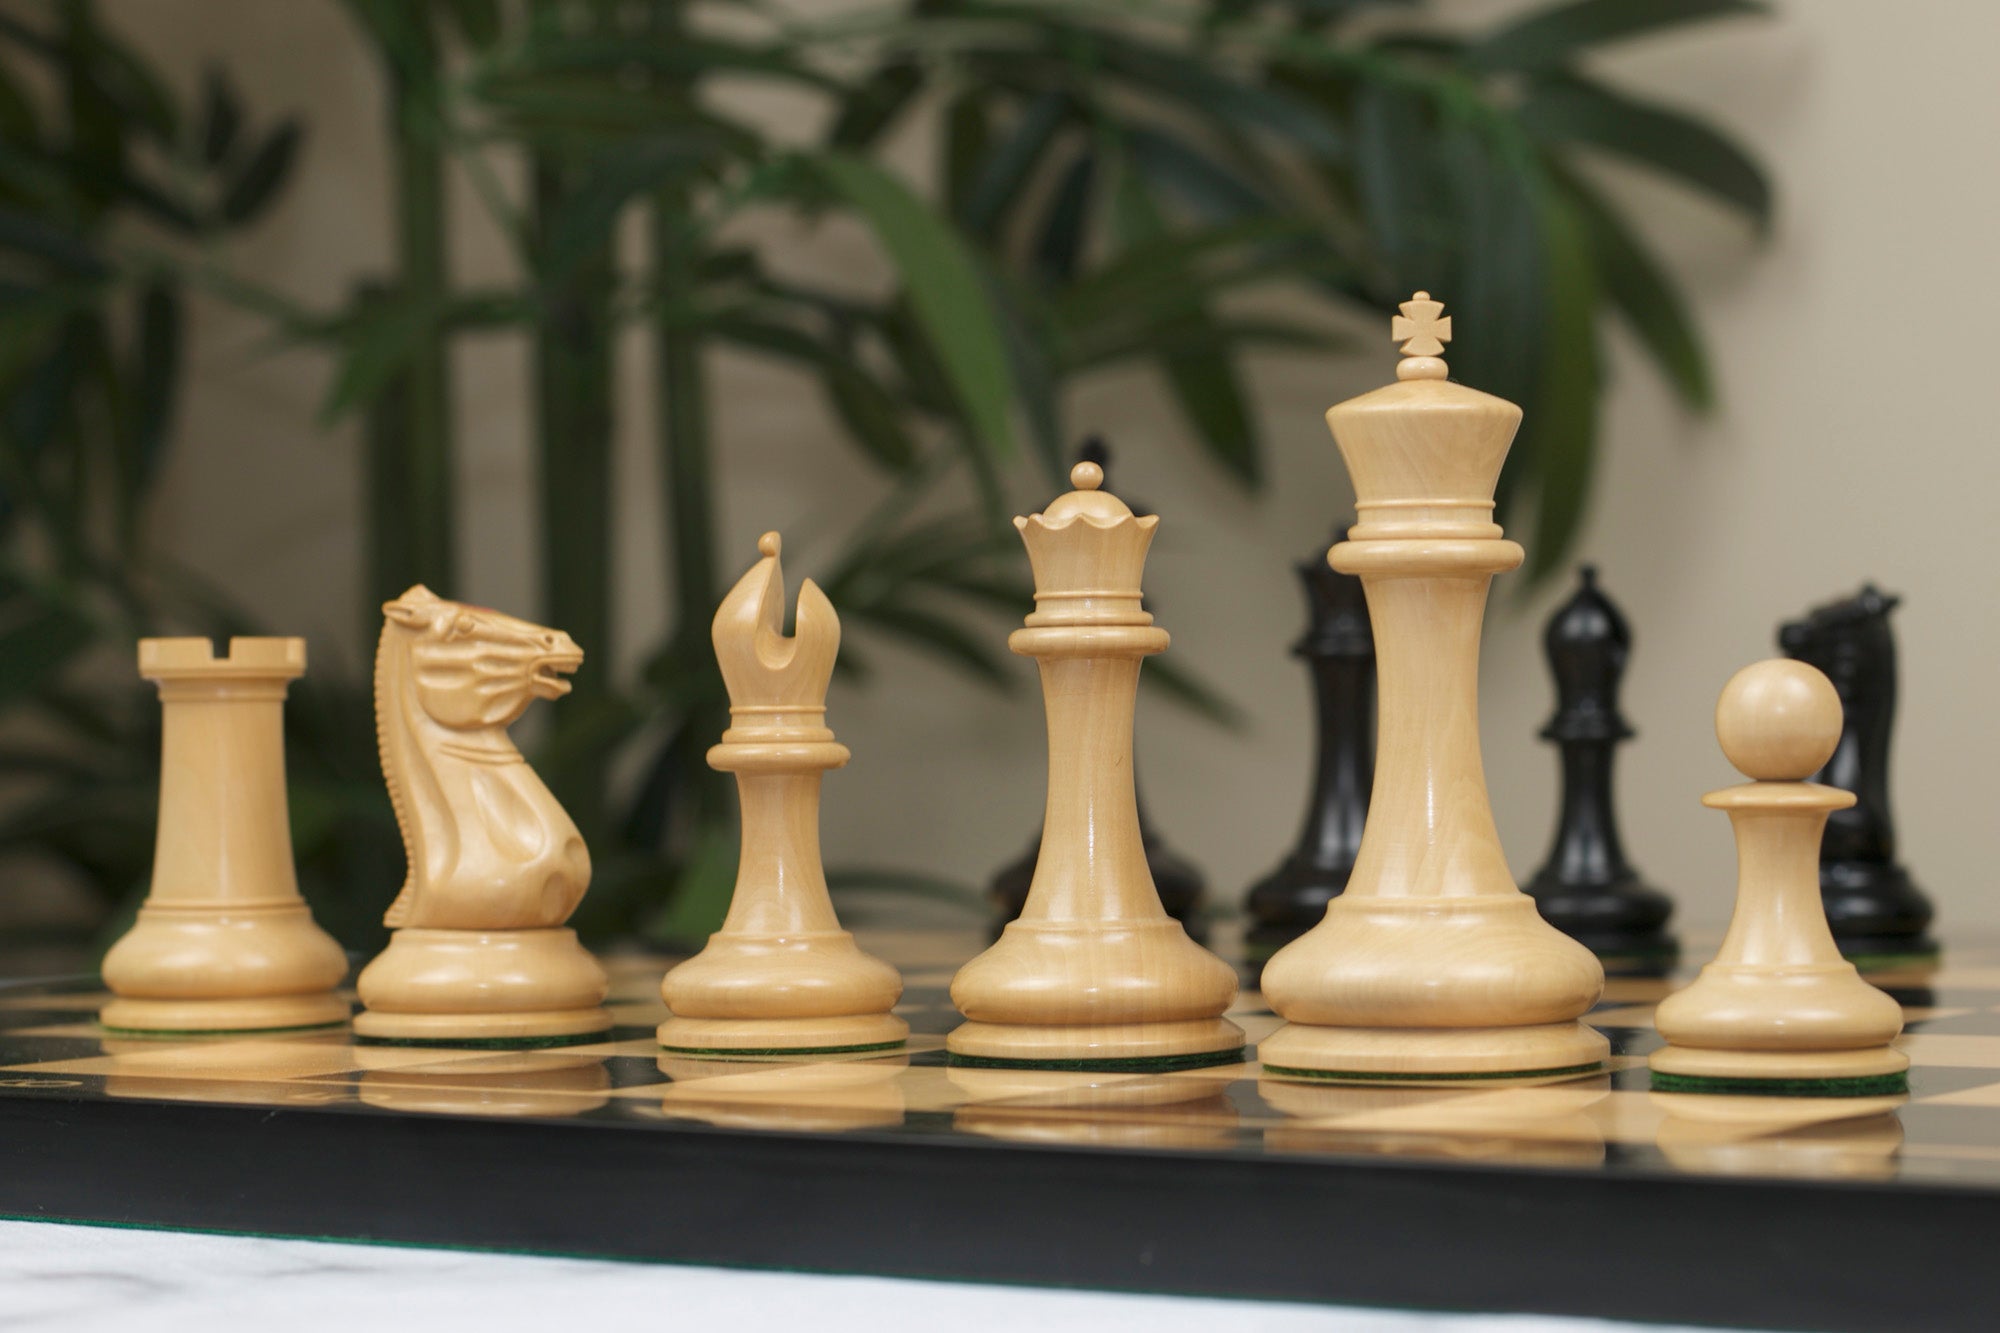 Morphy Cooke 1849-50 Reproduced 4.4" Chessmen in Non-Antiqued Boxwood and Ebony Wood